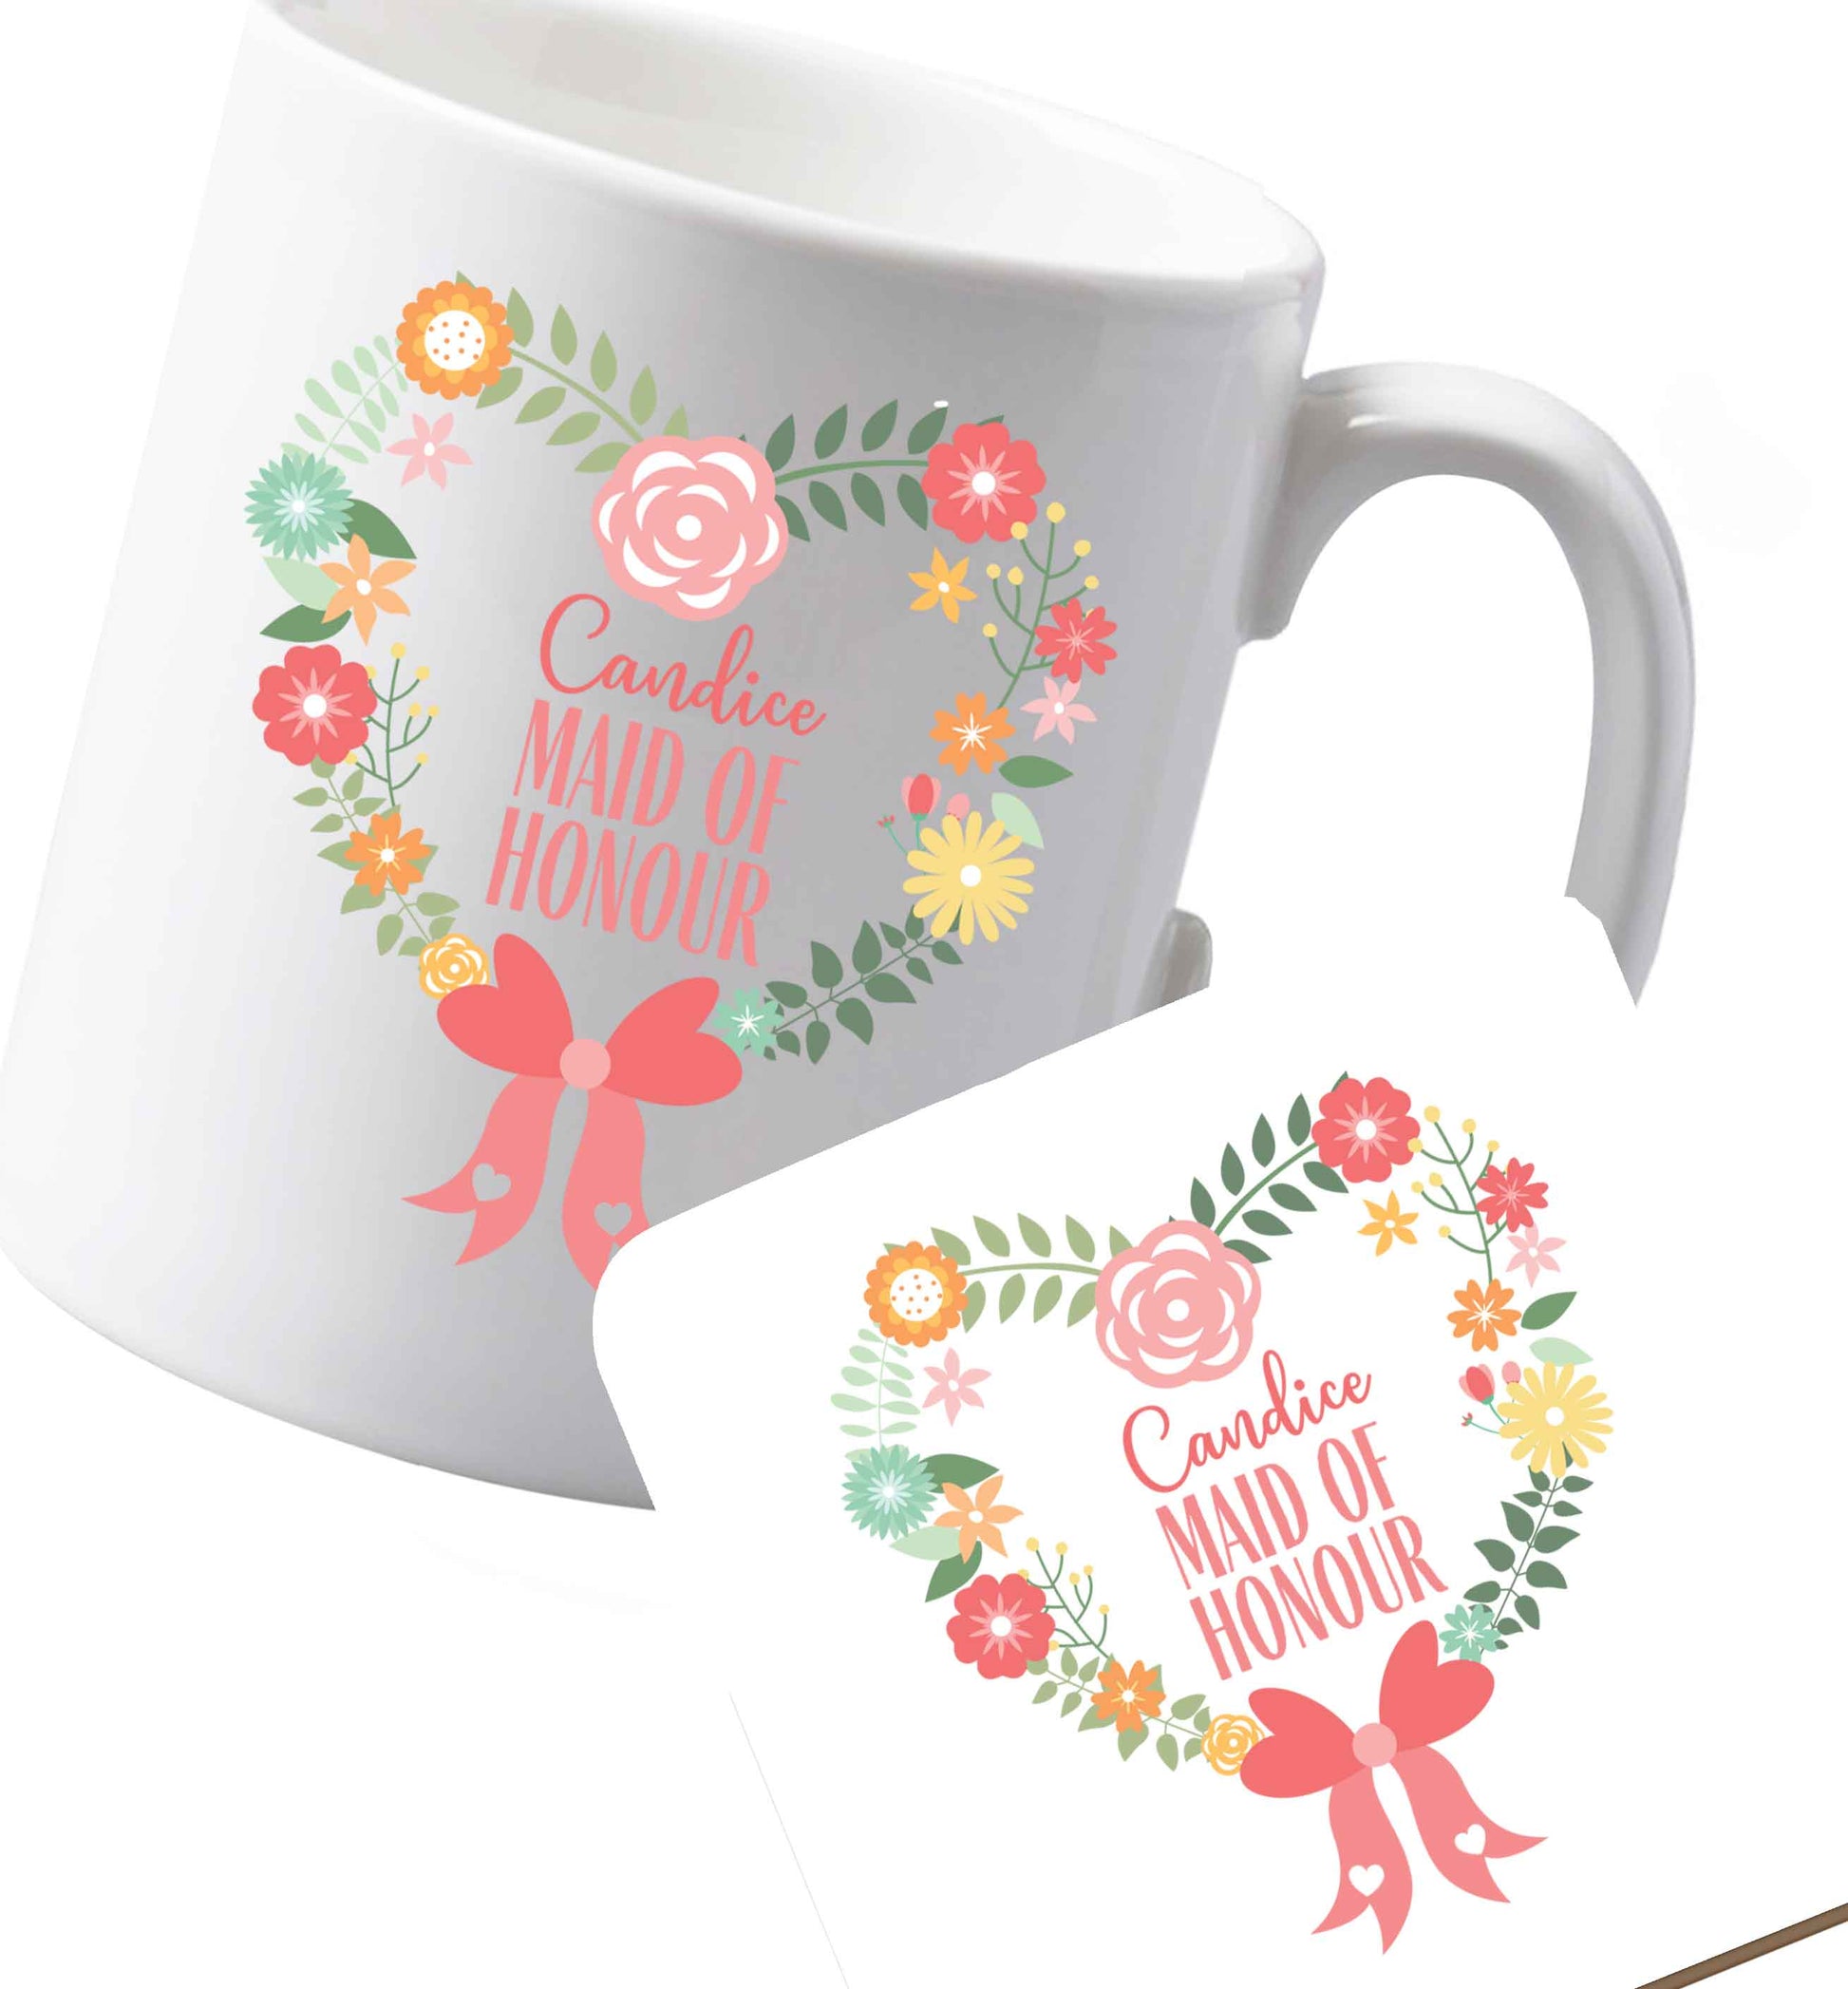 10 oz Ceramic mug and coaster Perfect wedding guest favours or hen party gifts! Personalised bridal floral wreath designs, any name, any role!   both sides